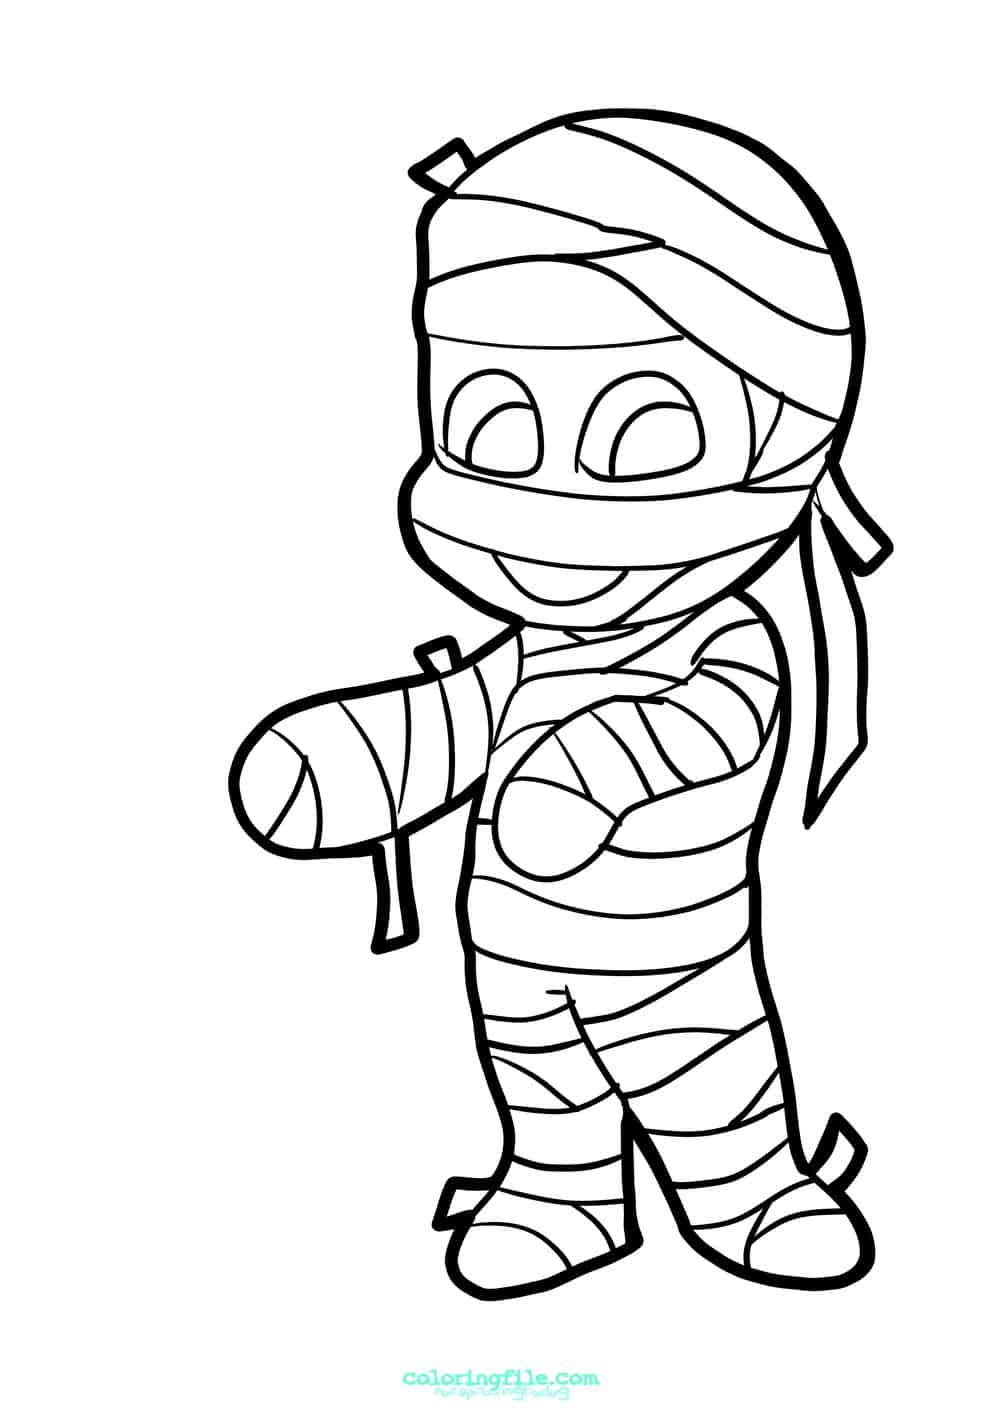 Halloween mummy coloring pages